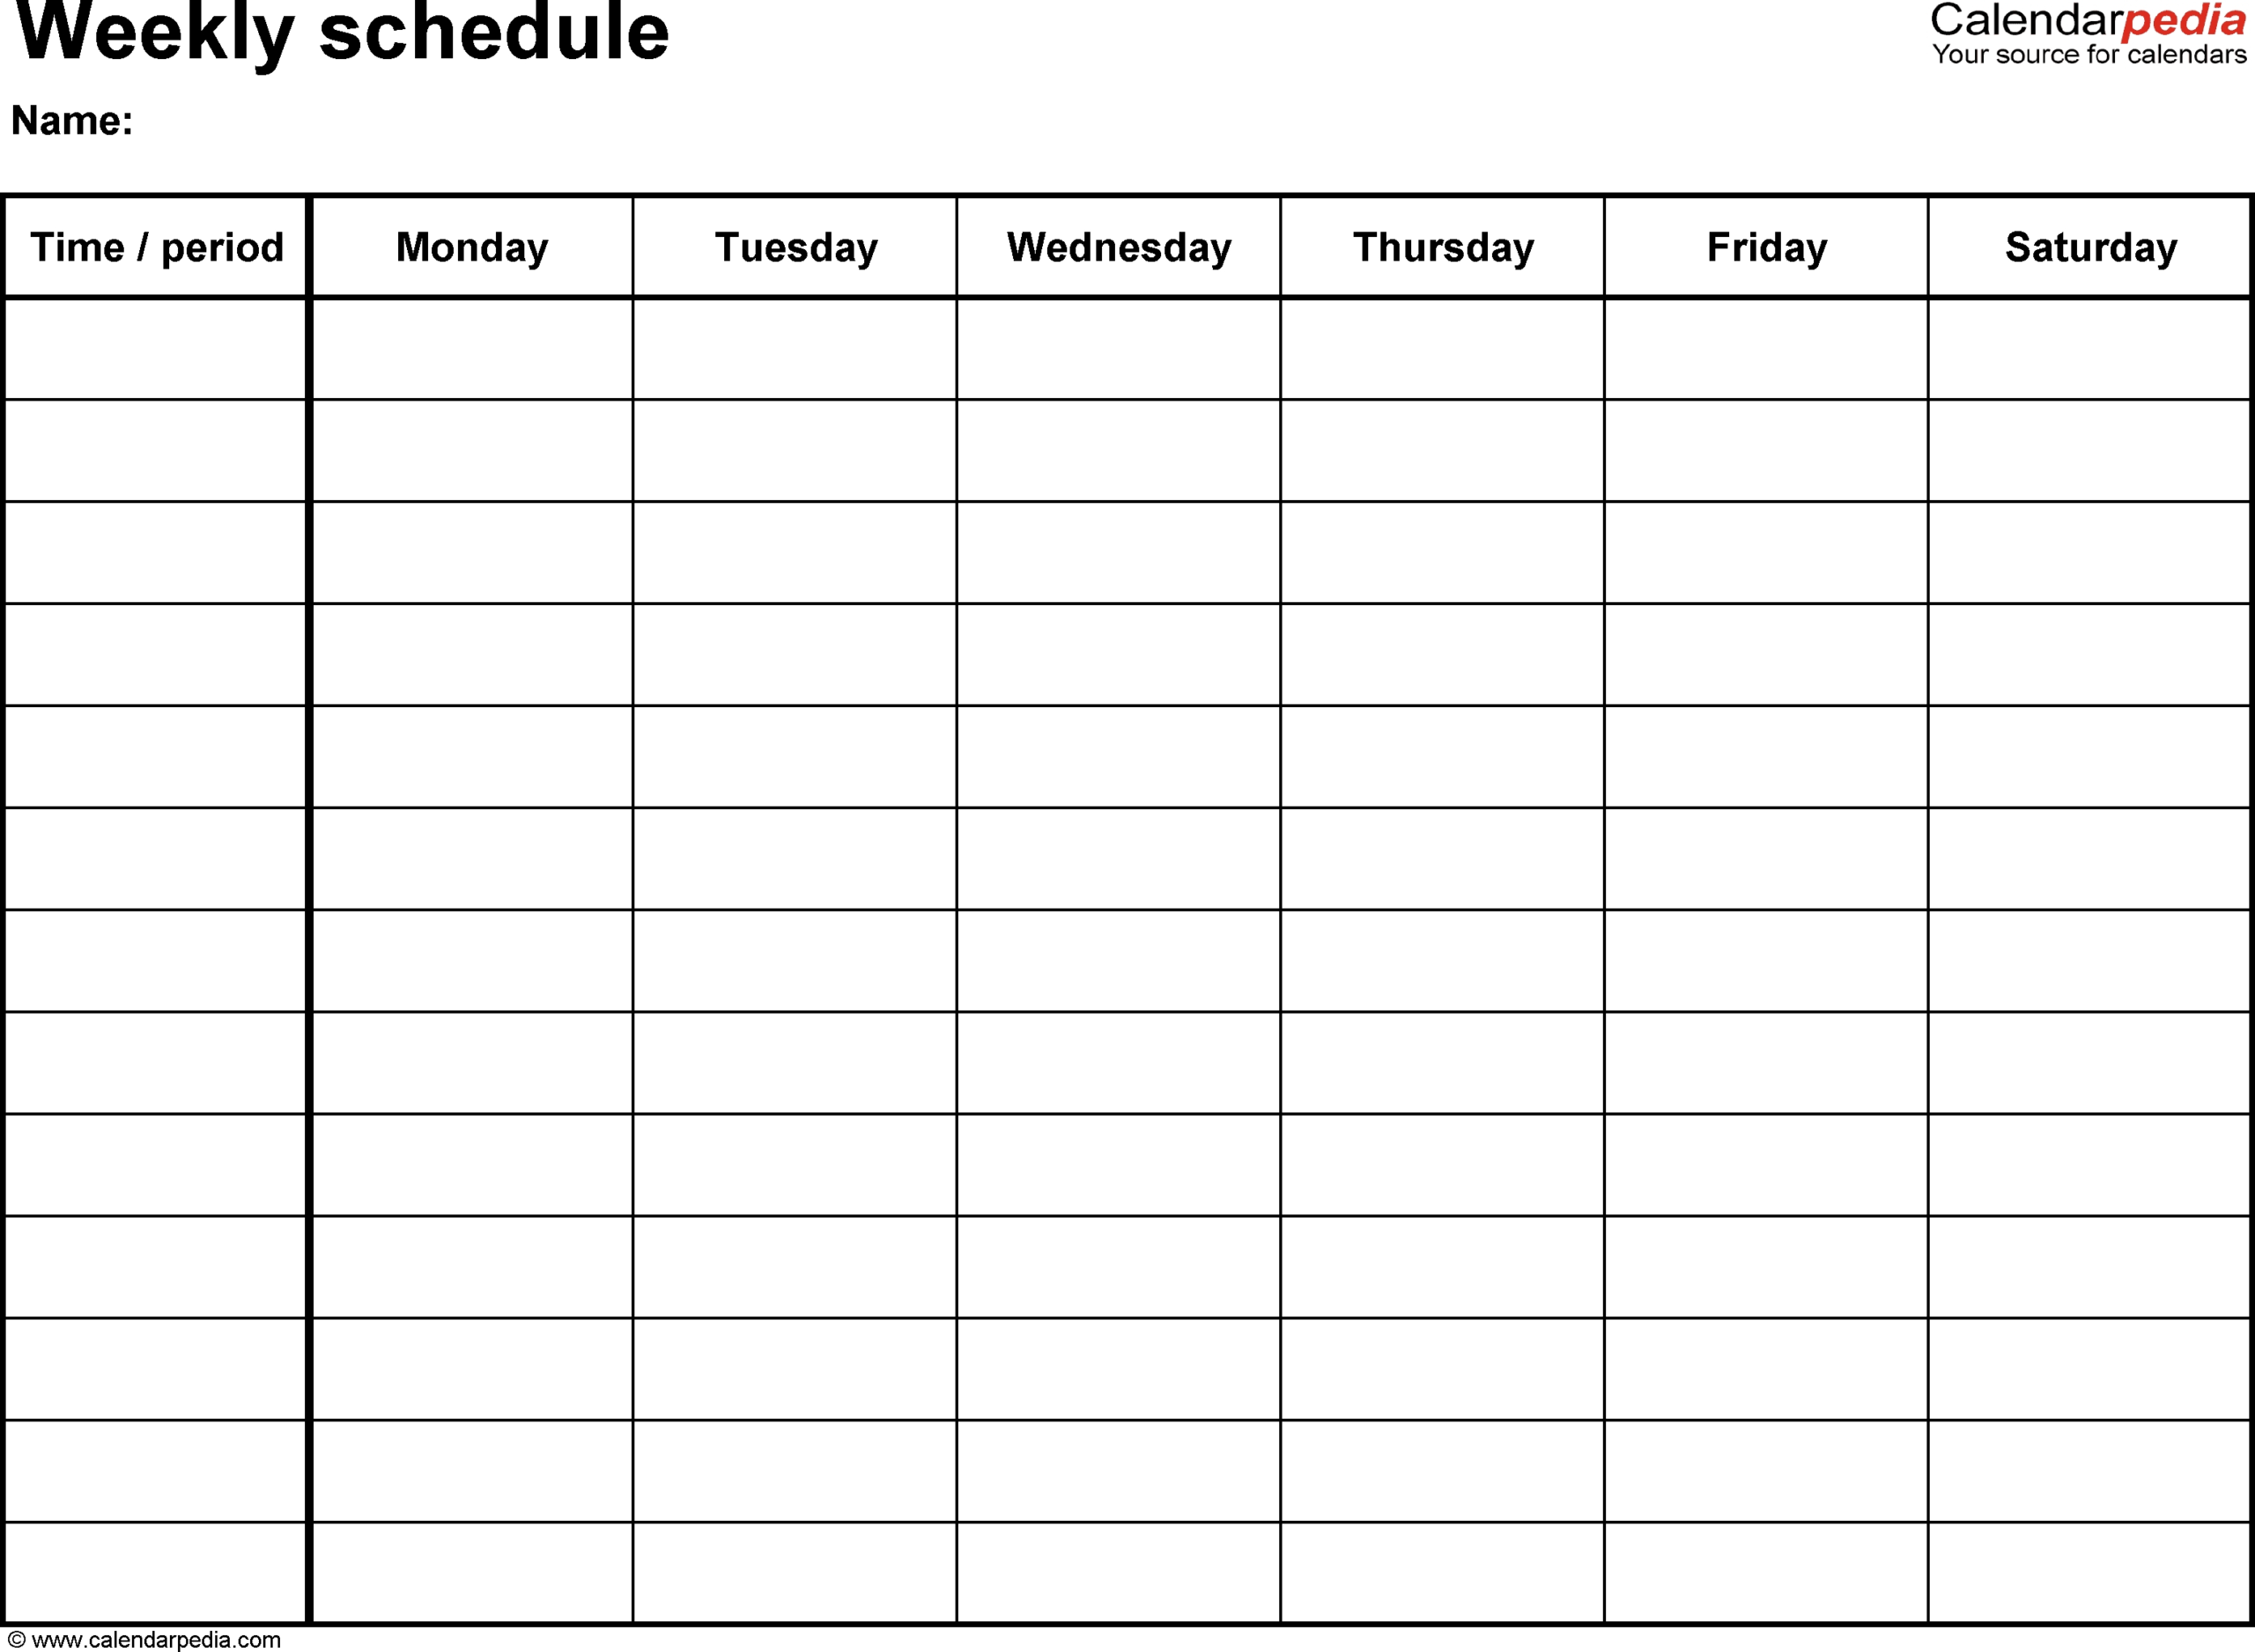 Monday Through Friday Schedule Template Free Calendar Inspiration Design with Schedule Mondy To Friday